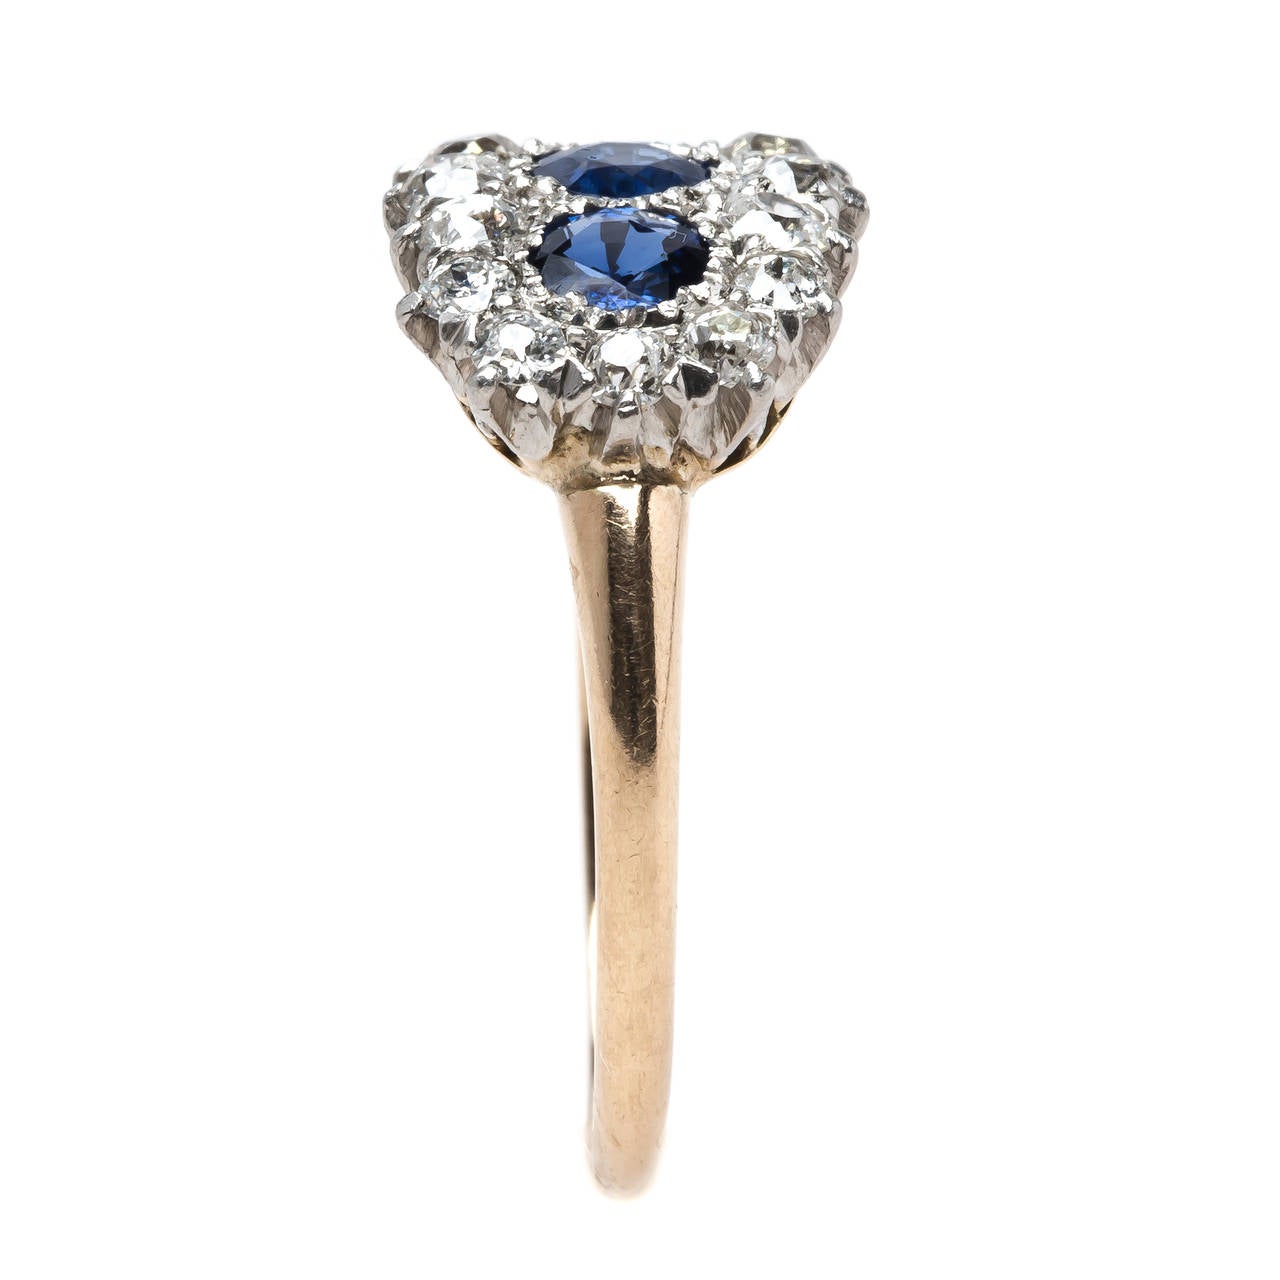 Women's Timeless and Unique Victorian Era Sapphire Ring with Glittering Halo